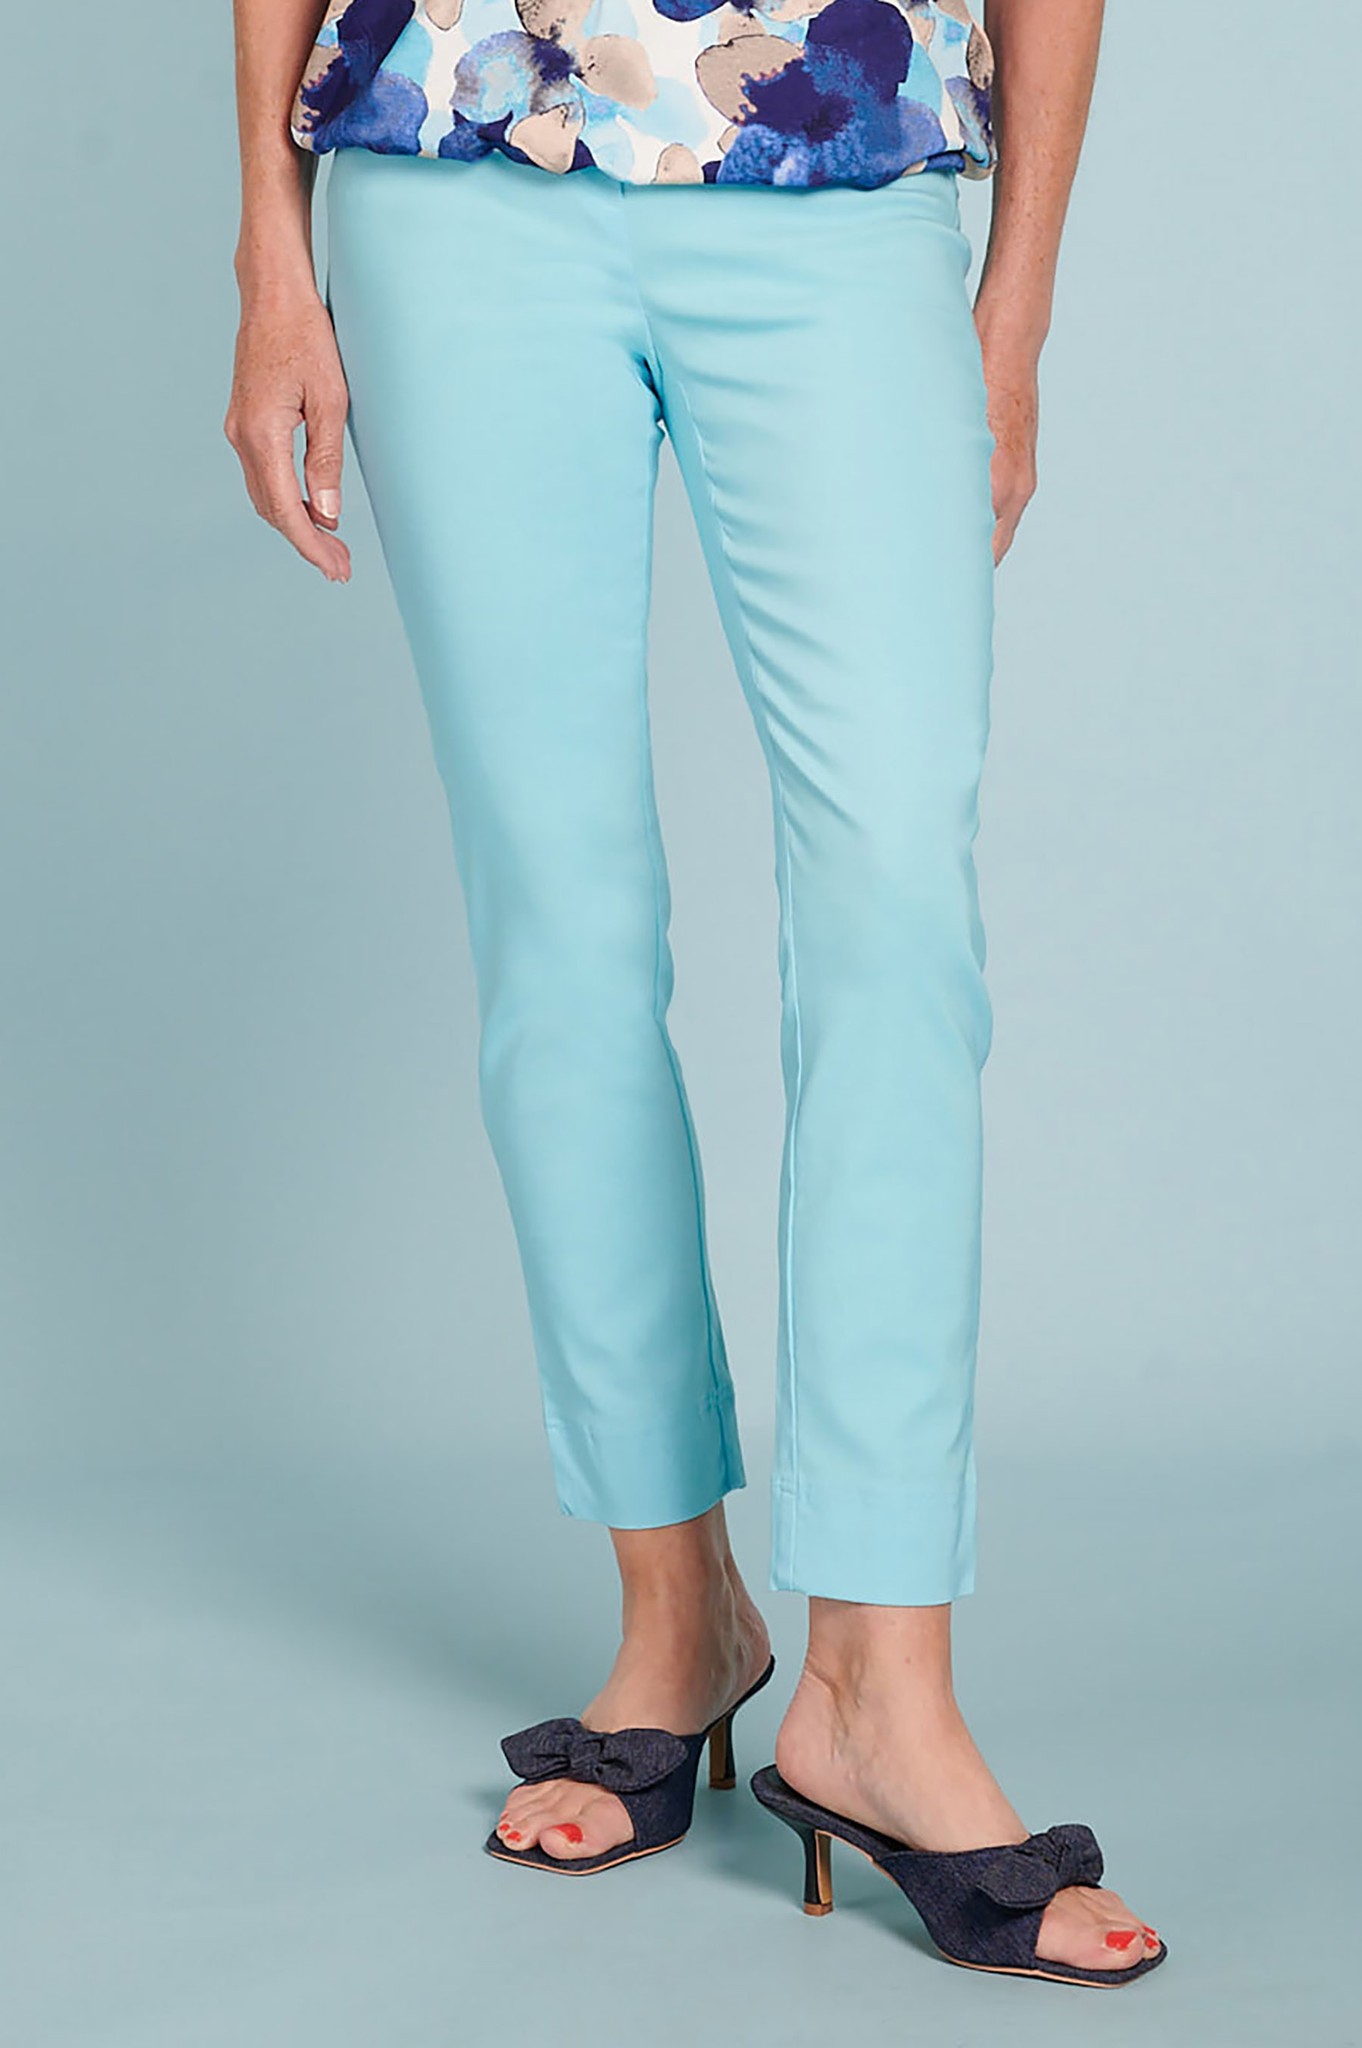 Ankle Grazer Trouser  FREE UK Delivery - Florence Roby